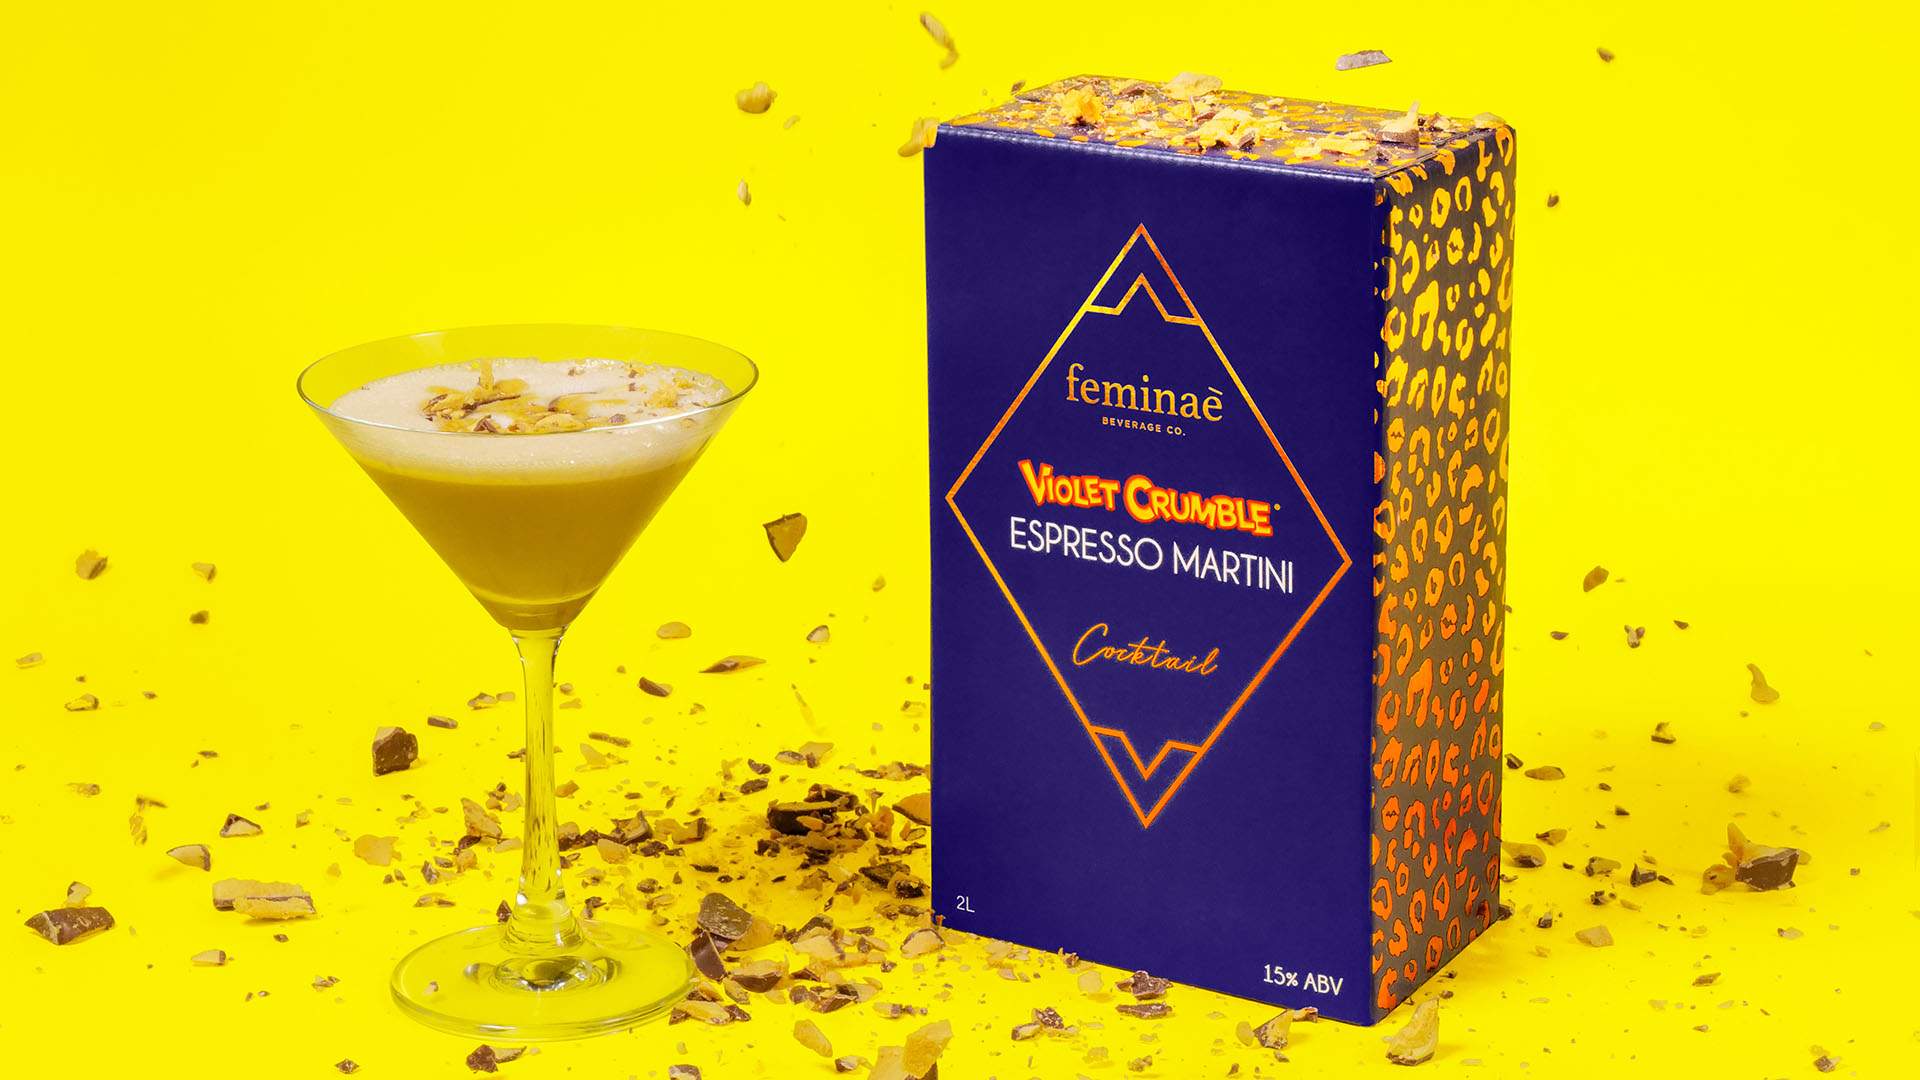 You Can Now Buy Violet Crumble Espresso Martinis in Two-Litre Ready-to-Drink Casks